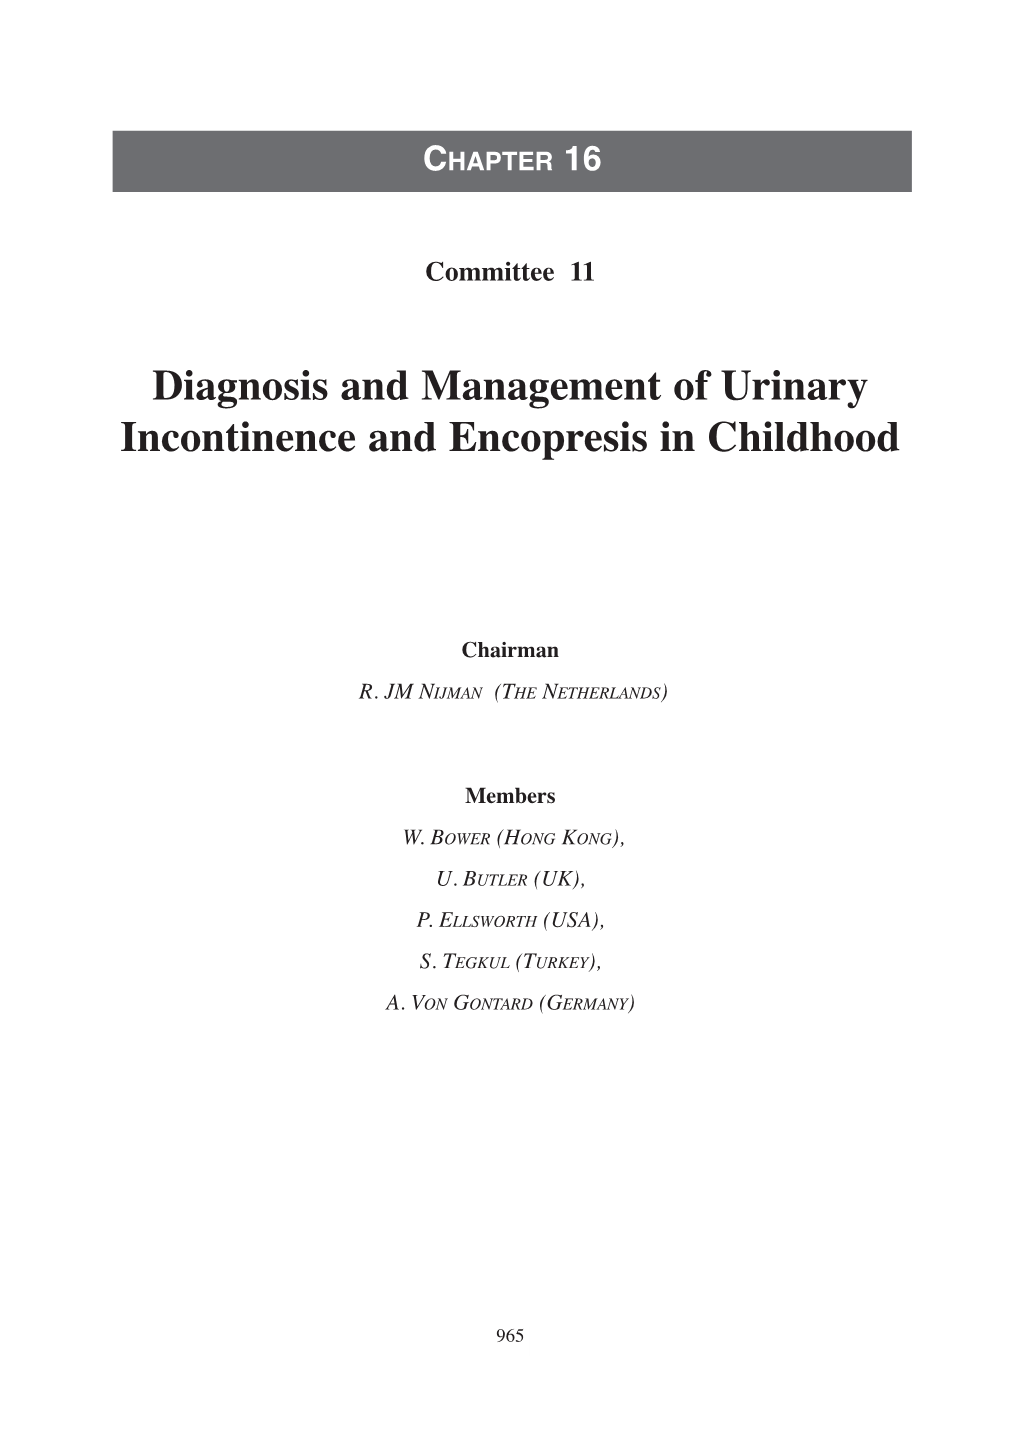 Diagnosis and Management of Urinary Incontinence and Encopresis in Childhood